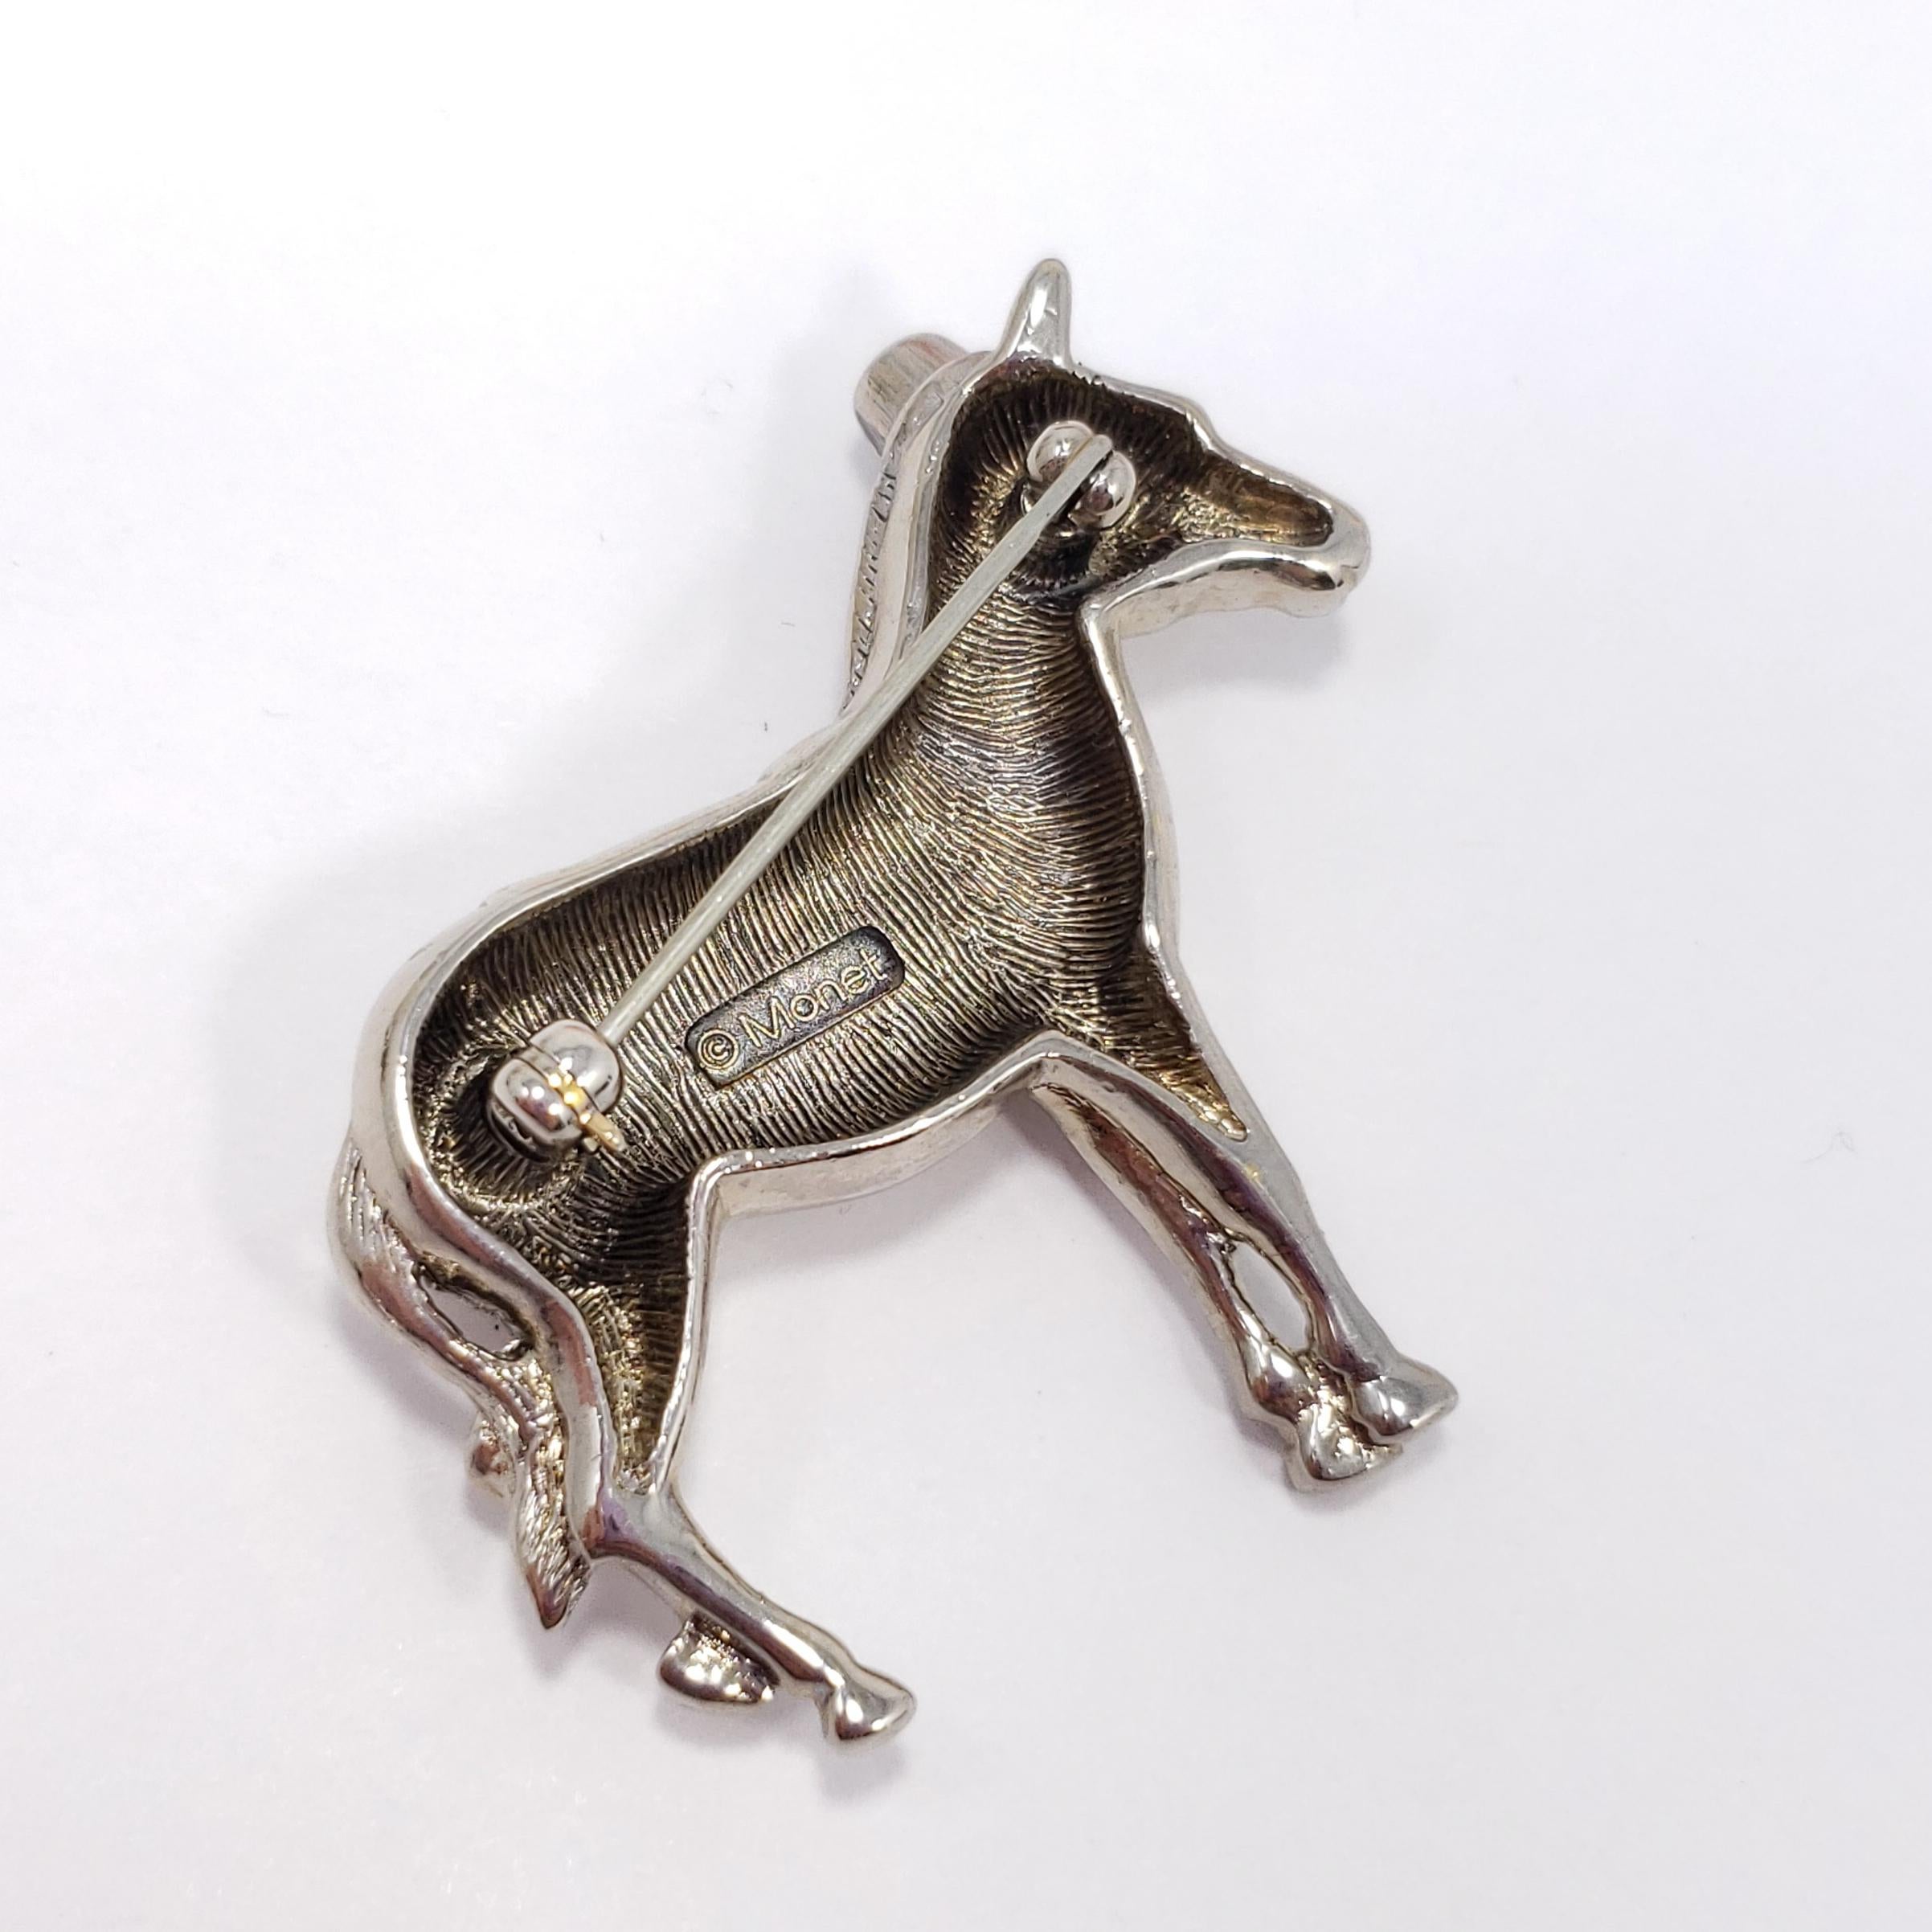 Retro Vintage Monet Democratic Donkey Pin Brooch in Silver, Red and Blue Enamel